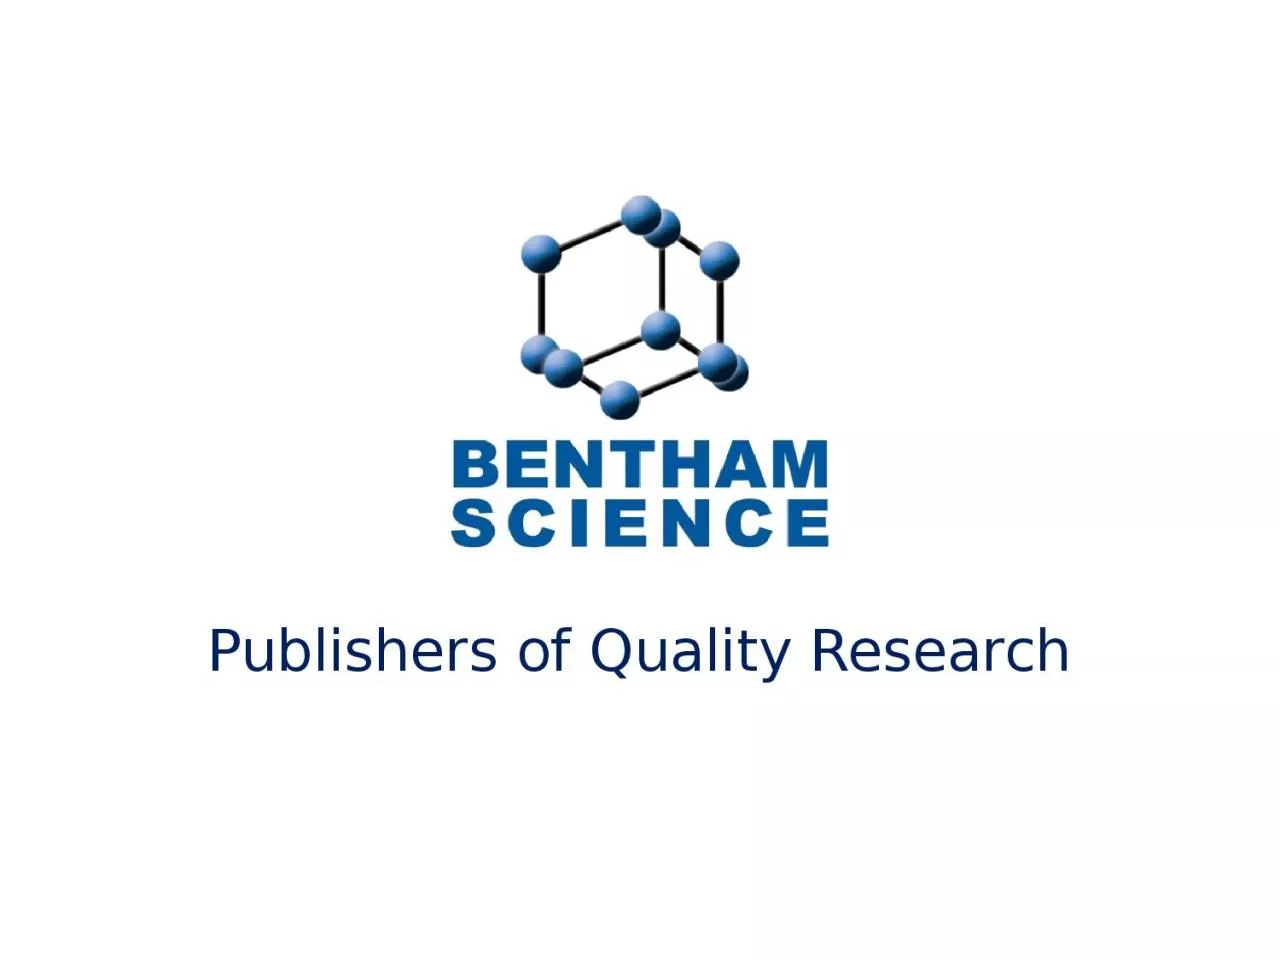 Publishers of Quality Research